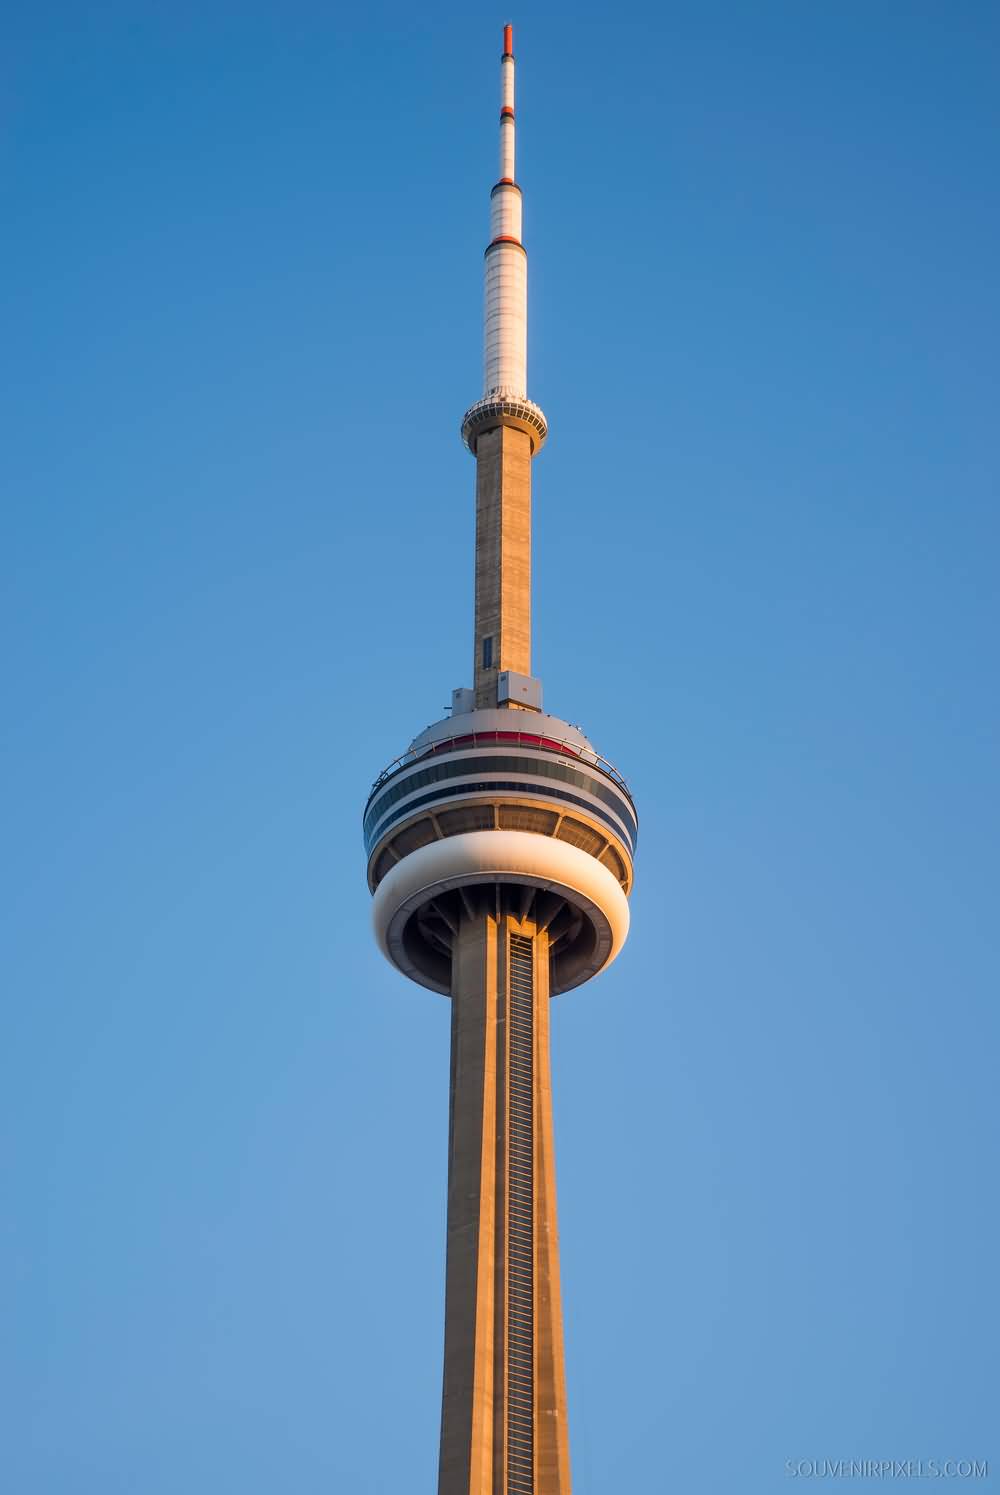 50 Most Adorable CN Tower Pictures And Images